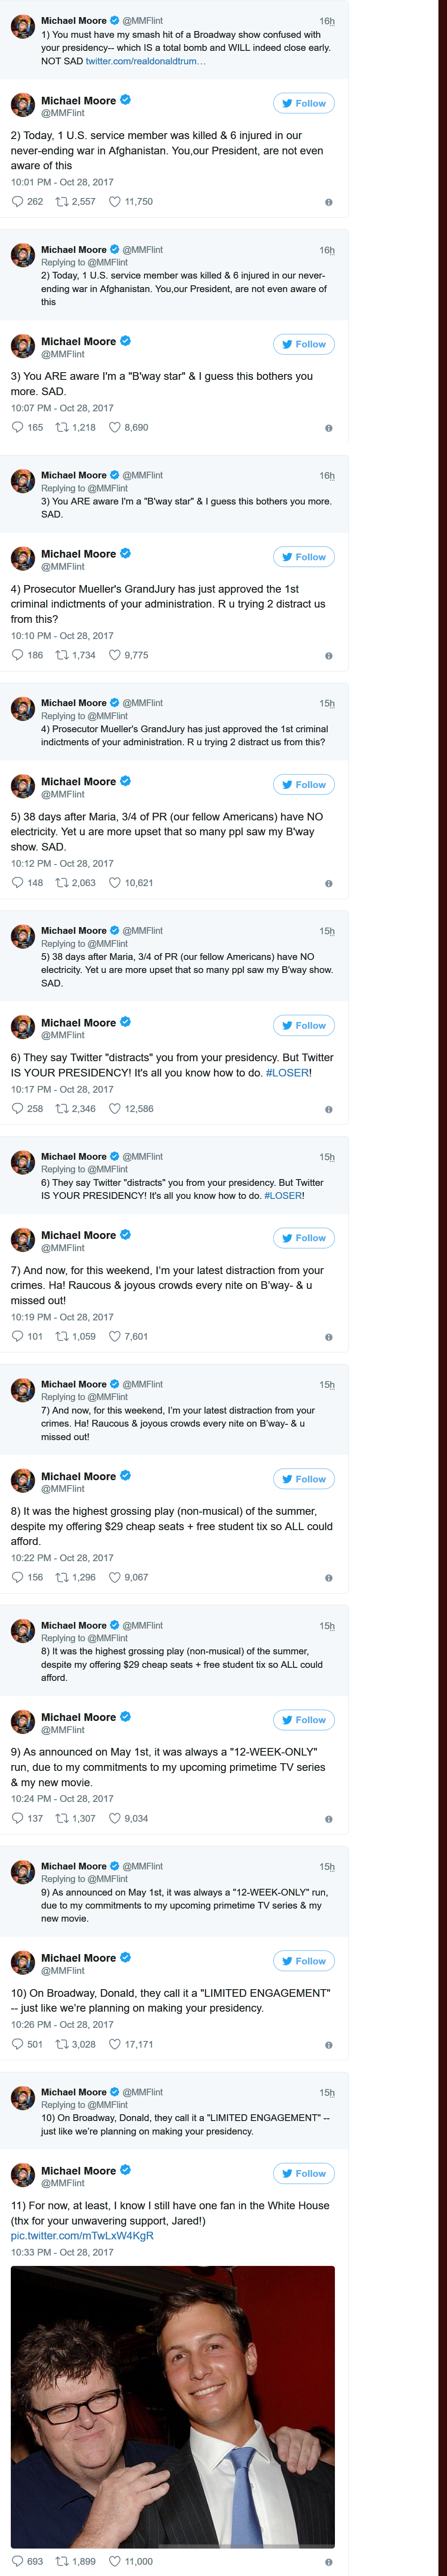 Trump_Tweets_That_Michael_Moore_Play_Was_“TOTAL_BOMB”_And_Claims_It_Was_Forced_To_Close_Deadline_-_2017-10-29_14.10.40 (2)